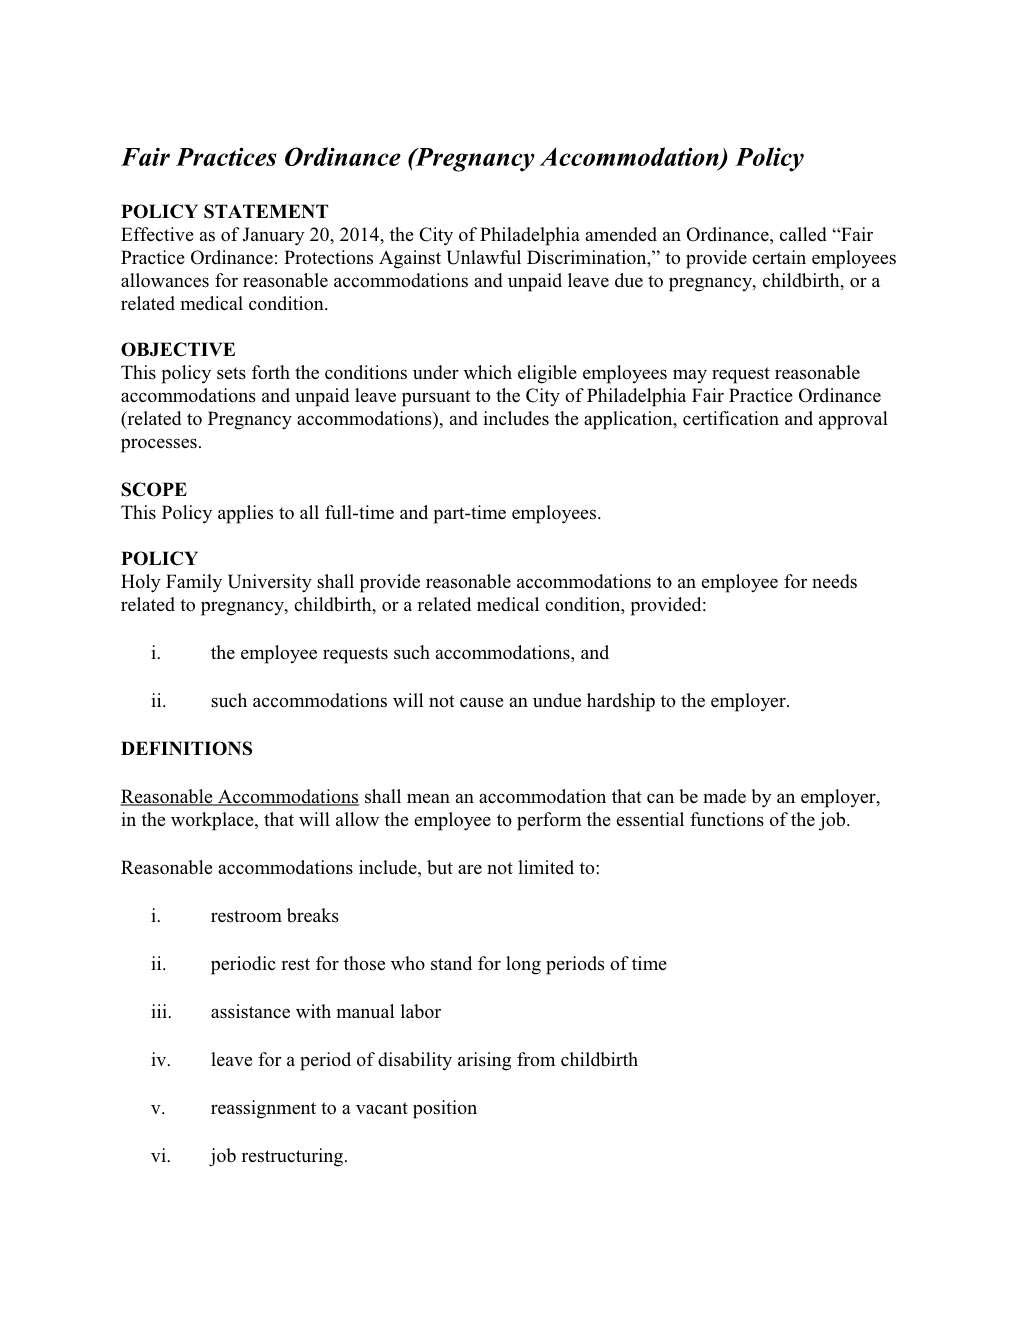 Fair Practices Ordinance (Pregnancy Accommodation) Policy